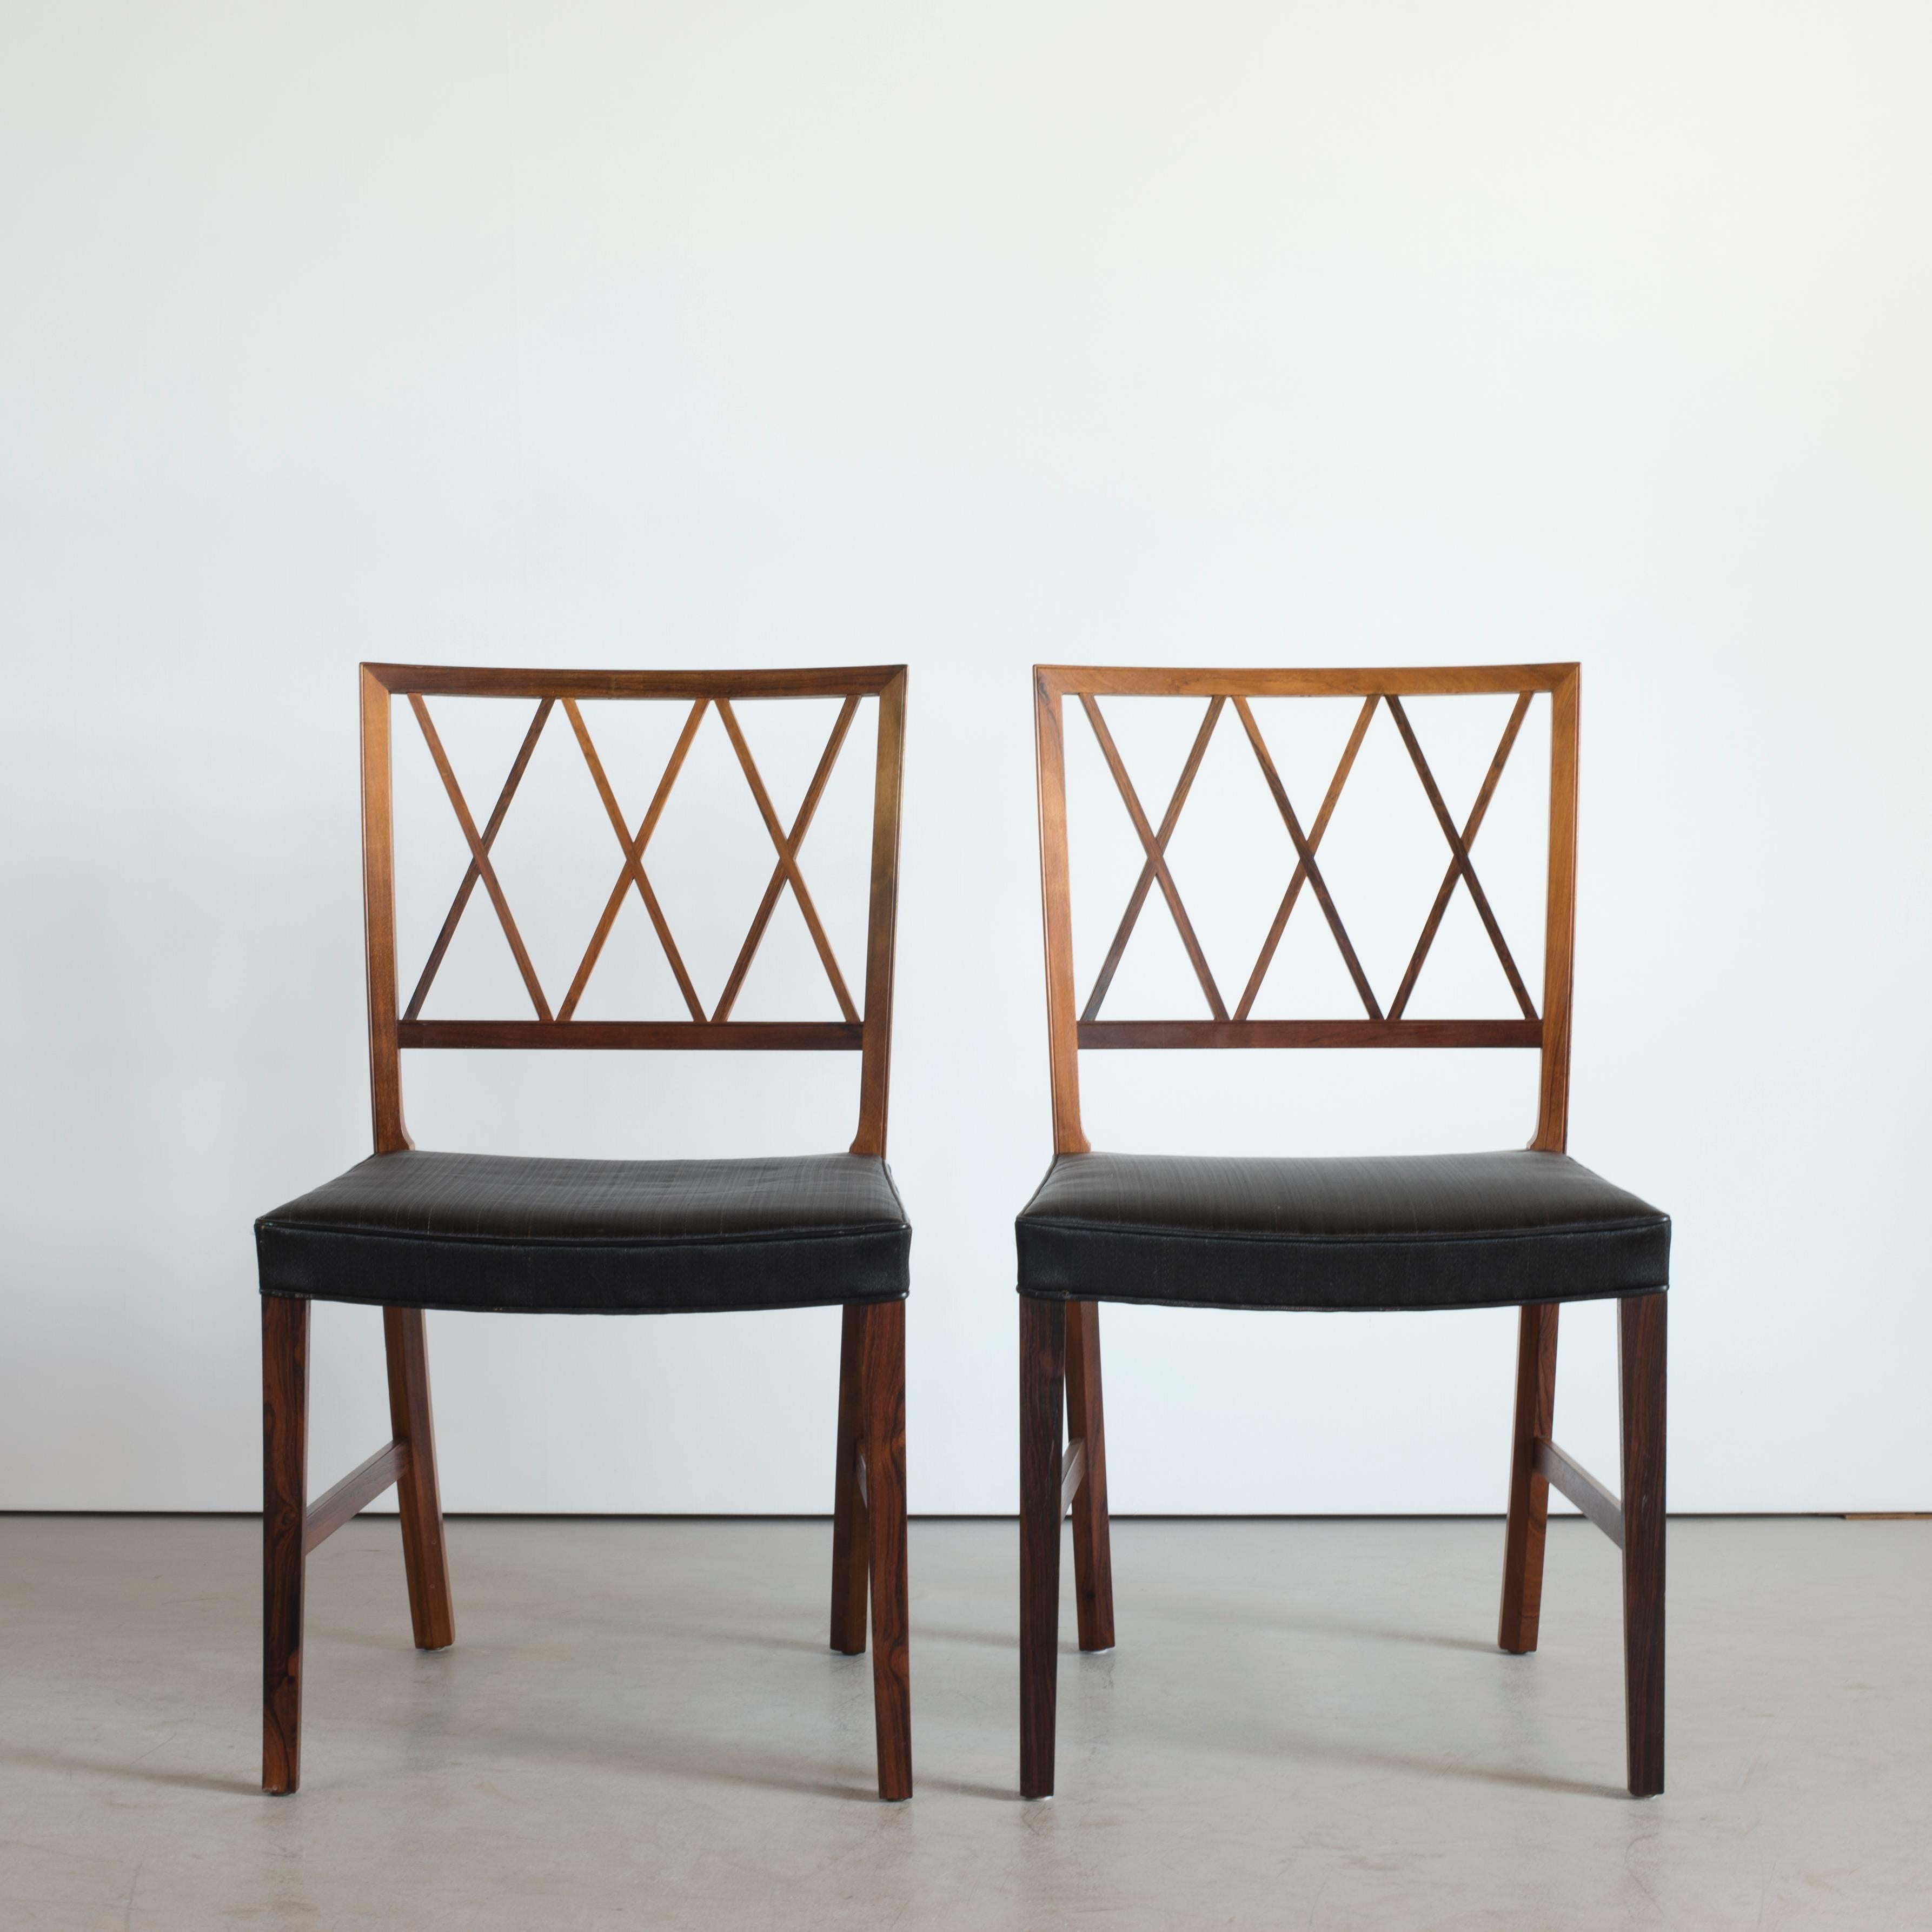 Set of six dining chairs by Ole Wanscher. Executed by A. J. Iversen for Illums Bolighus, Copenhagen, Denmark.

Rosewood and black horsehair.

Matching dining table available.